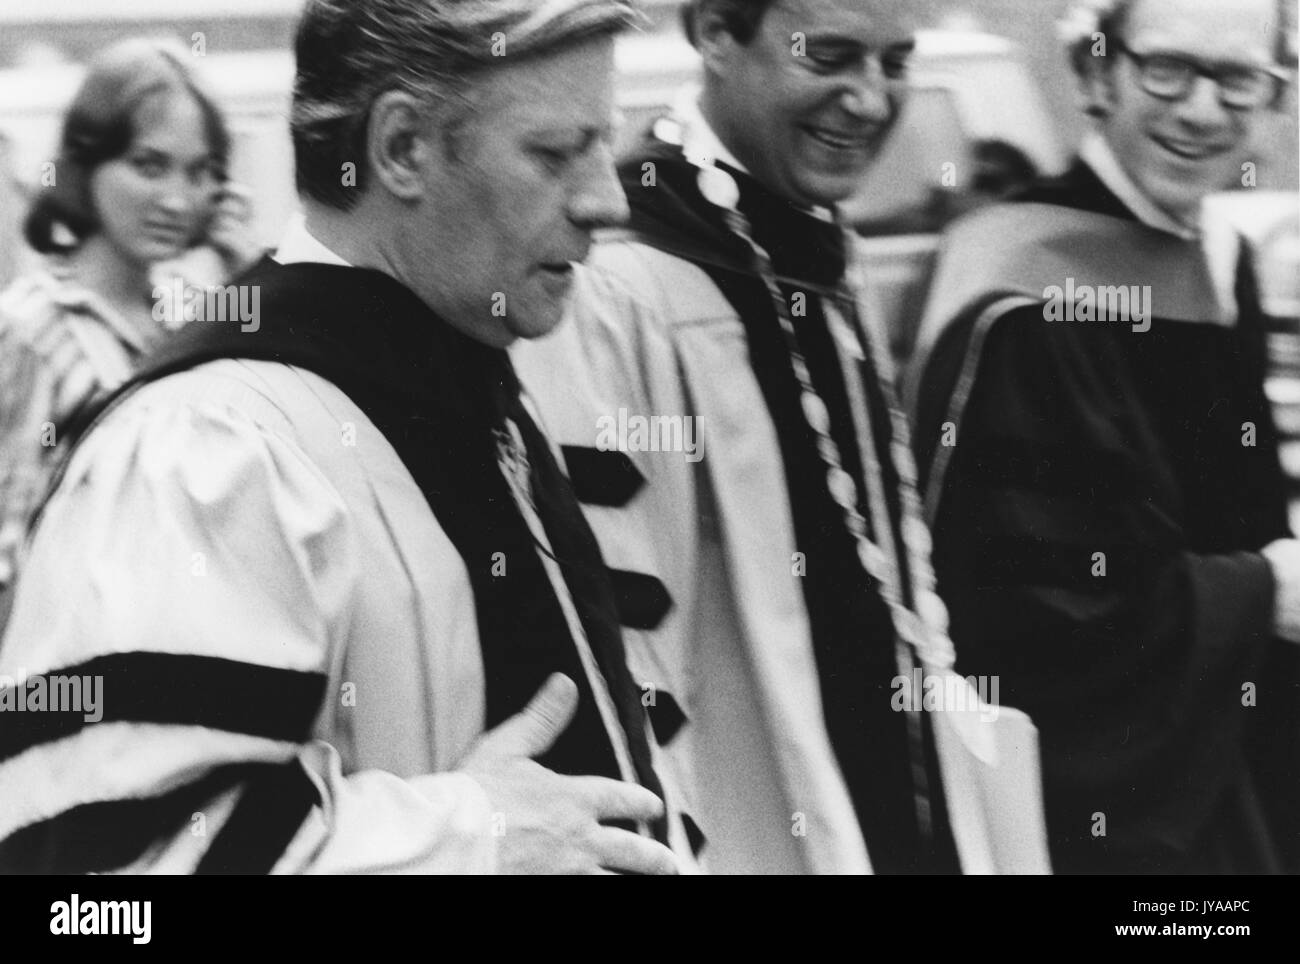 Helmut Schmidt, the Chancellor of the Federal Republic of Germany, walking with Steven Muller, president of The Johns Hopkins University, and an unidentified man, at the Bicentennial Convocation held at The Johns Hopkins University Homewood Campus, July 16, 1976. Stock Photo